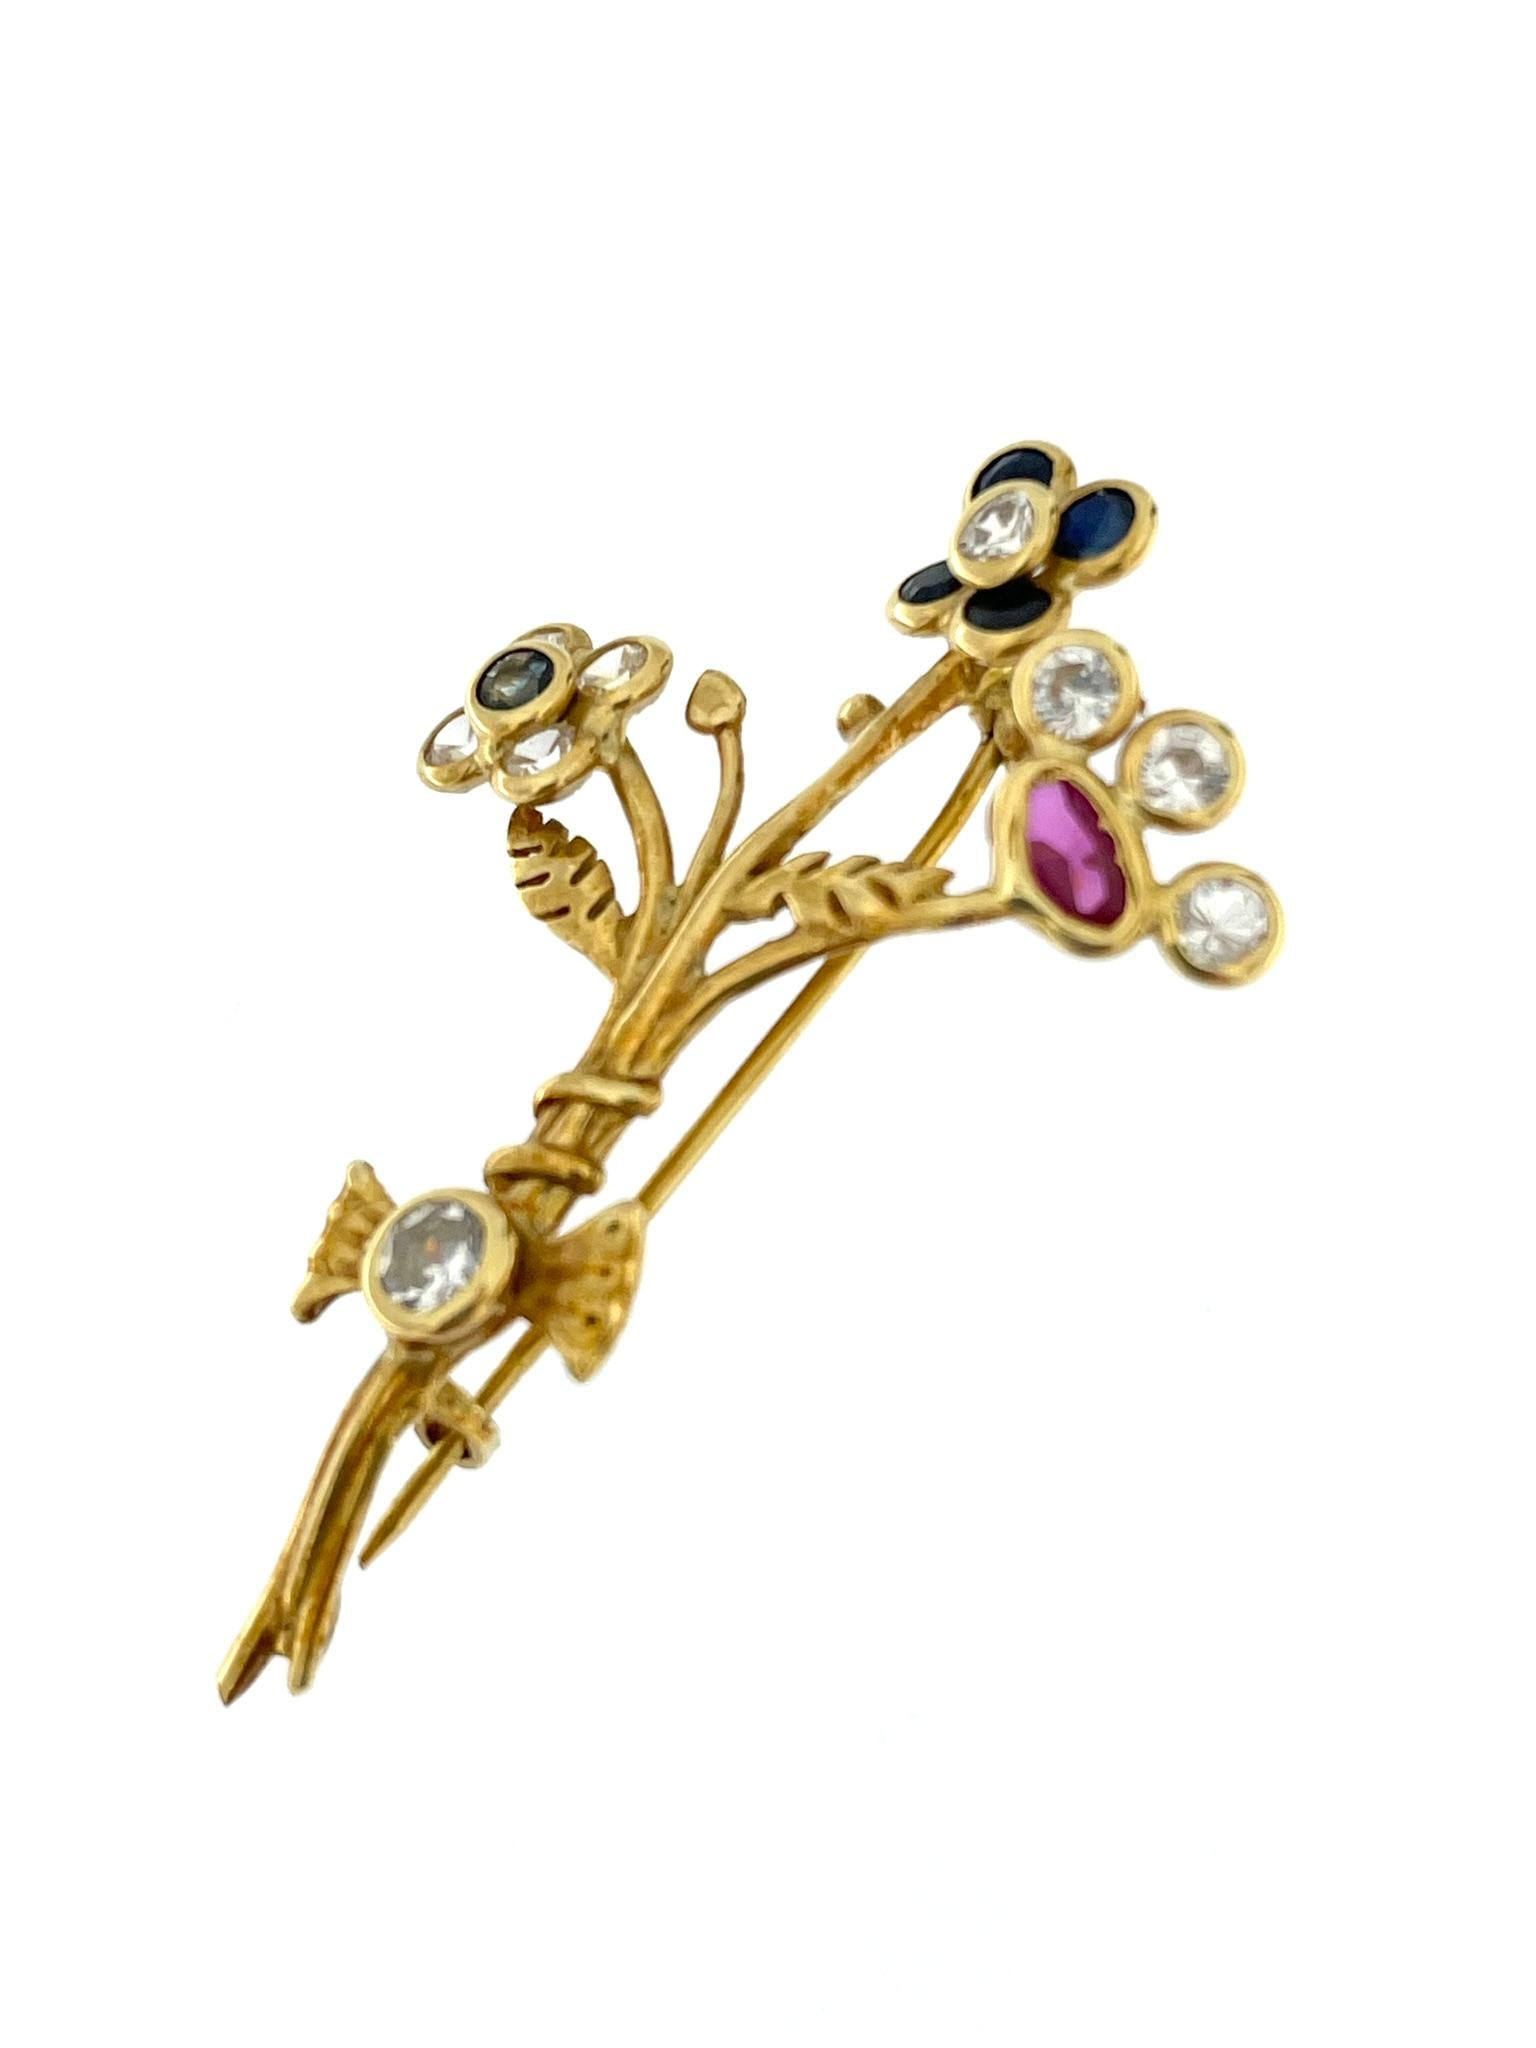 Women's or Men's Handcrafted 18 karat Yellow Gold Brooch with Zircons and Quartz For Sale